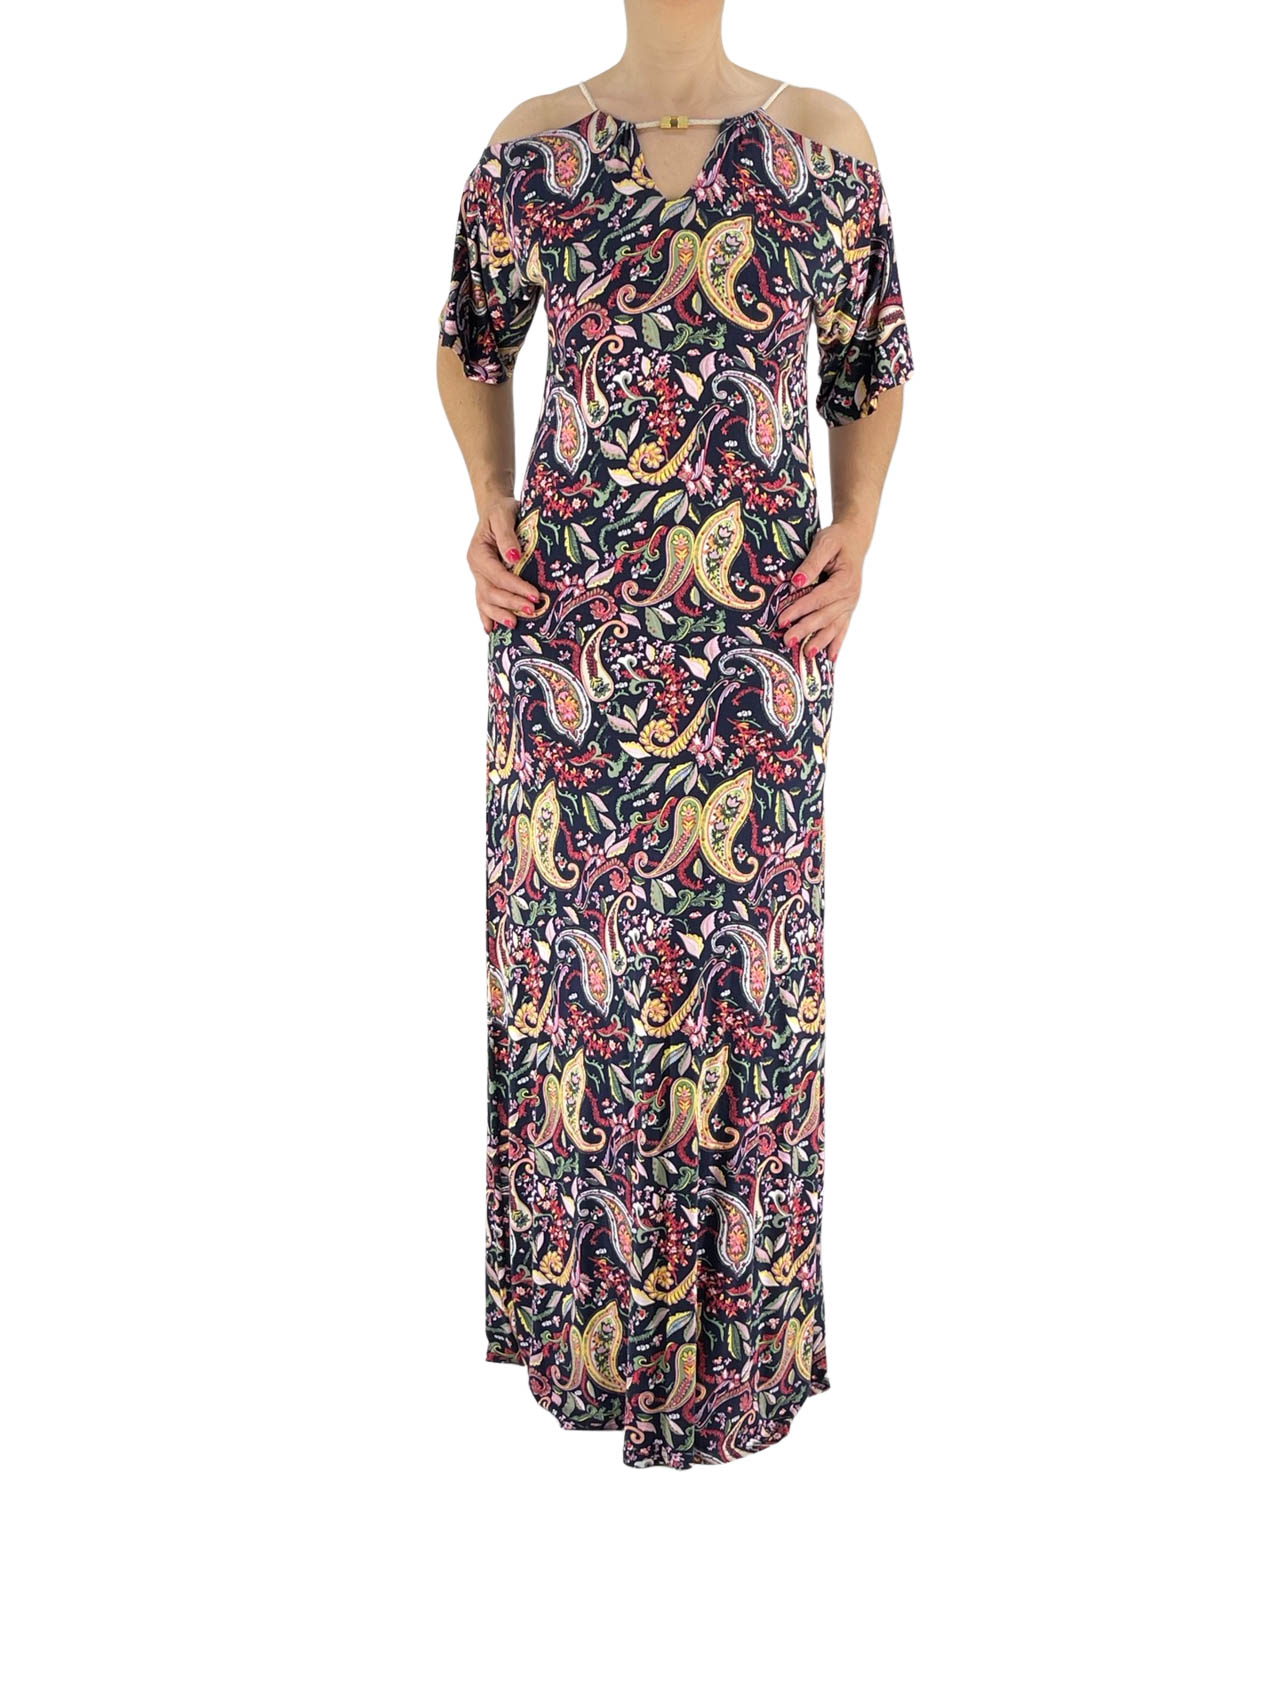 Printed dress with cord and off shoulders code 9392